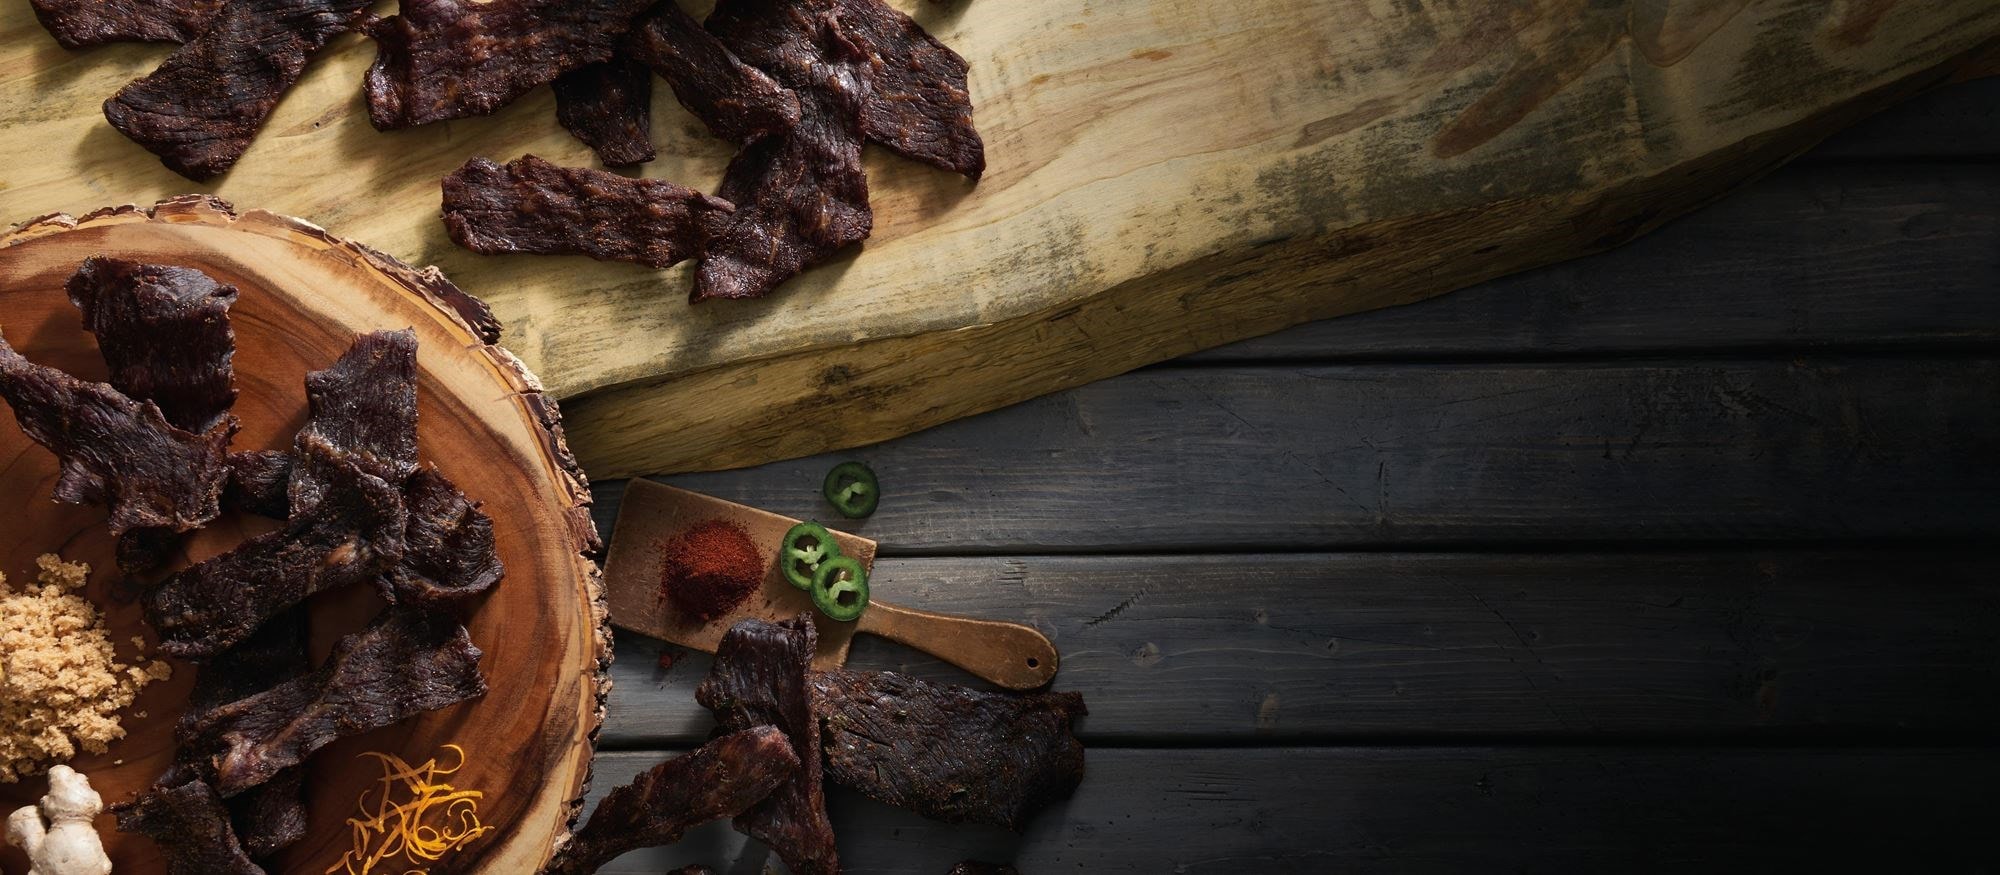 Easy and delicious beef jerky recipe using the Convection Steam Mode setting of your Wolf Convection Steam Oven